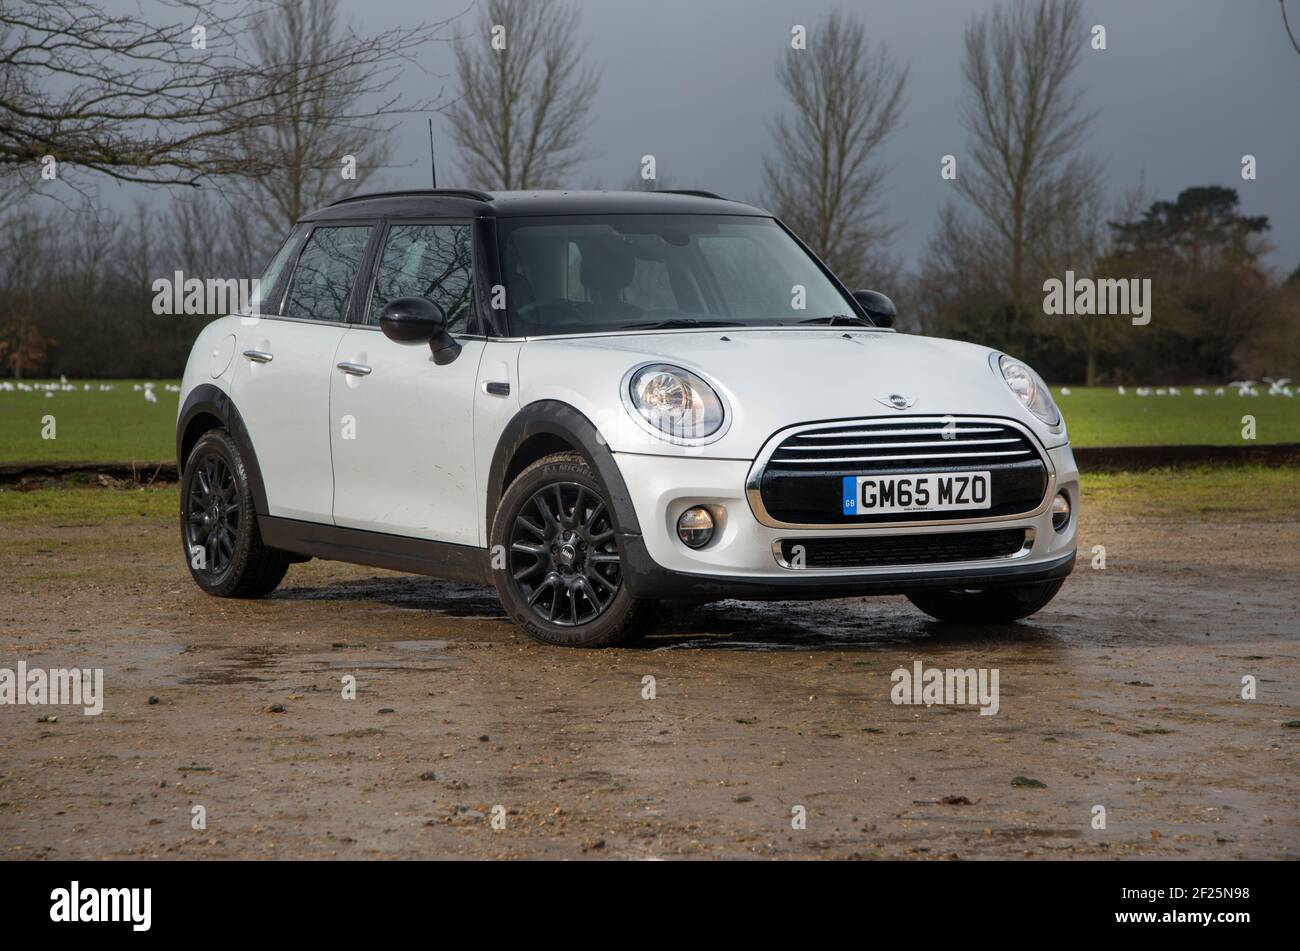 2015 F55 shape Mini Cooper 5 door hatch, small British car built in Cowley,  Oxford by BMW Stock Photo - Alamy